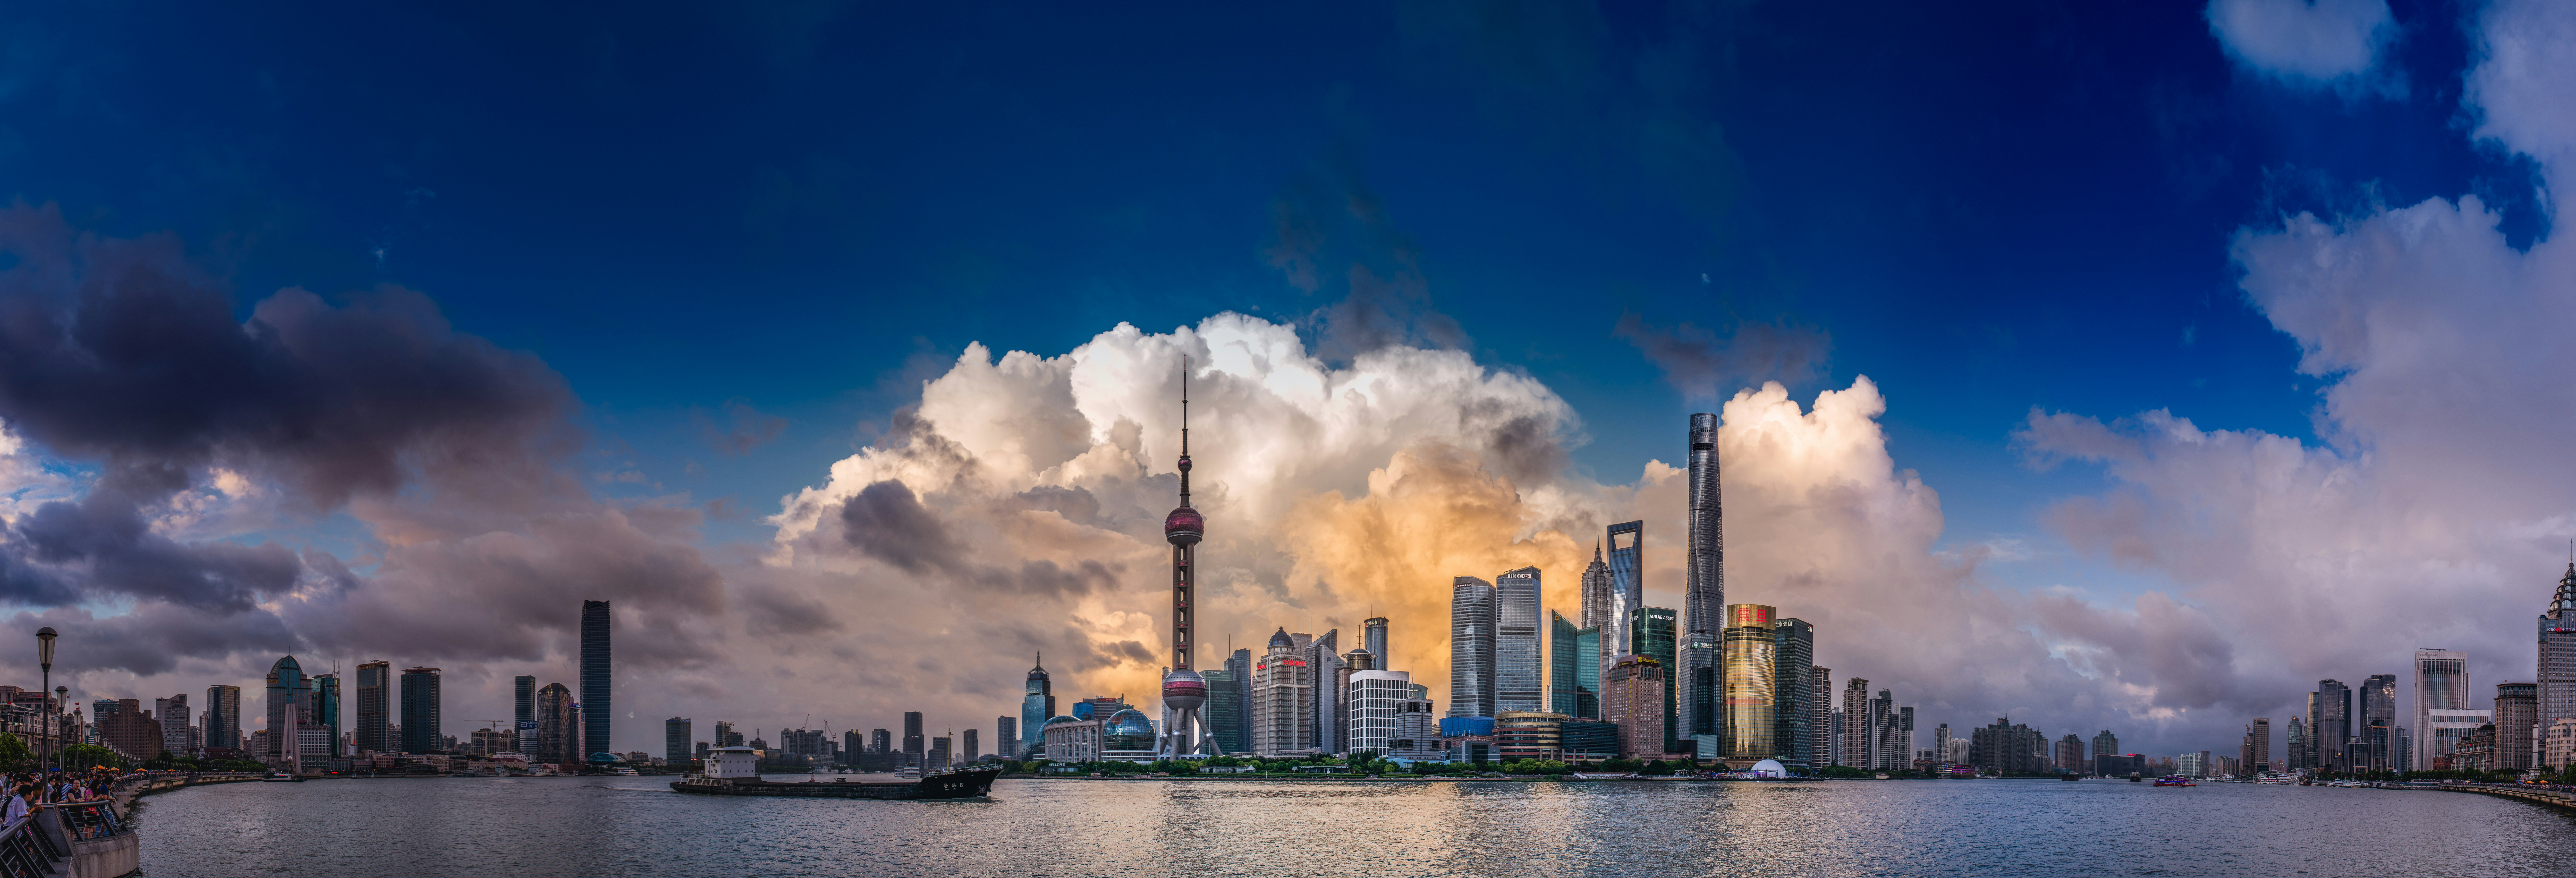 11 Things To Avoid In Shanghai China The Solivagant Soul